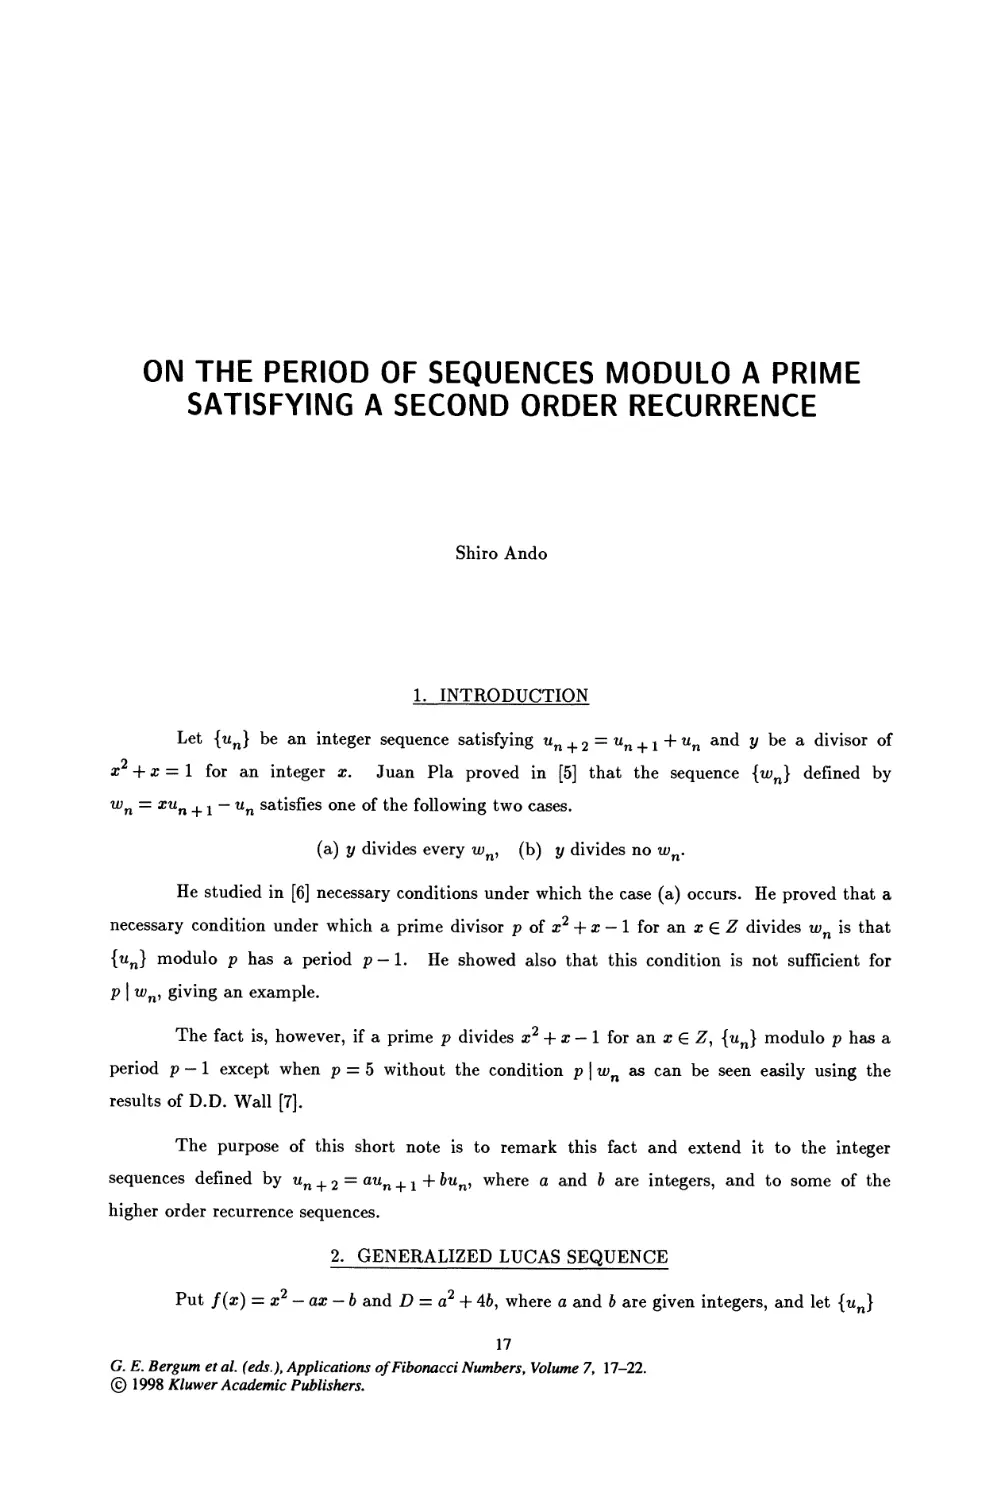 3. On The Period of Sequences Modulo a Prime Satisfying A Second order Recurrence